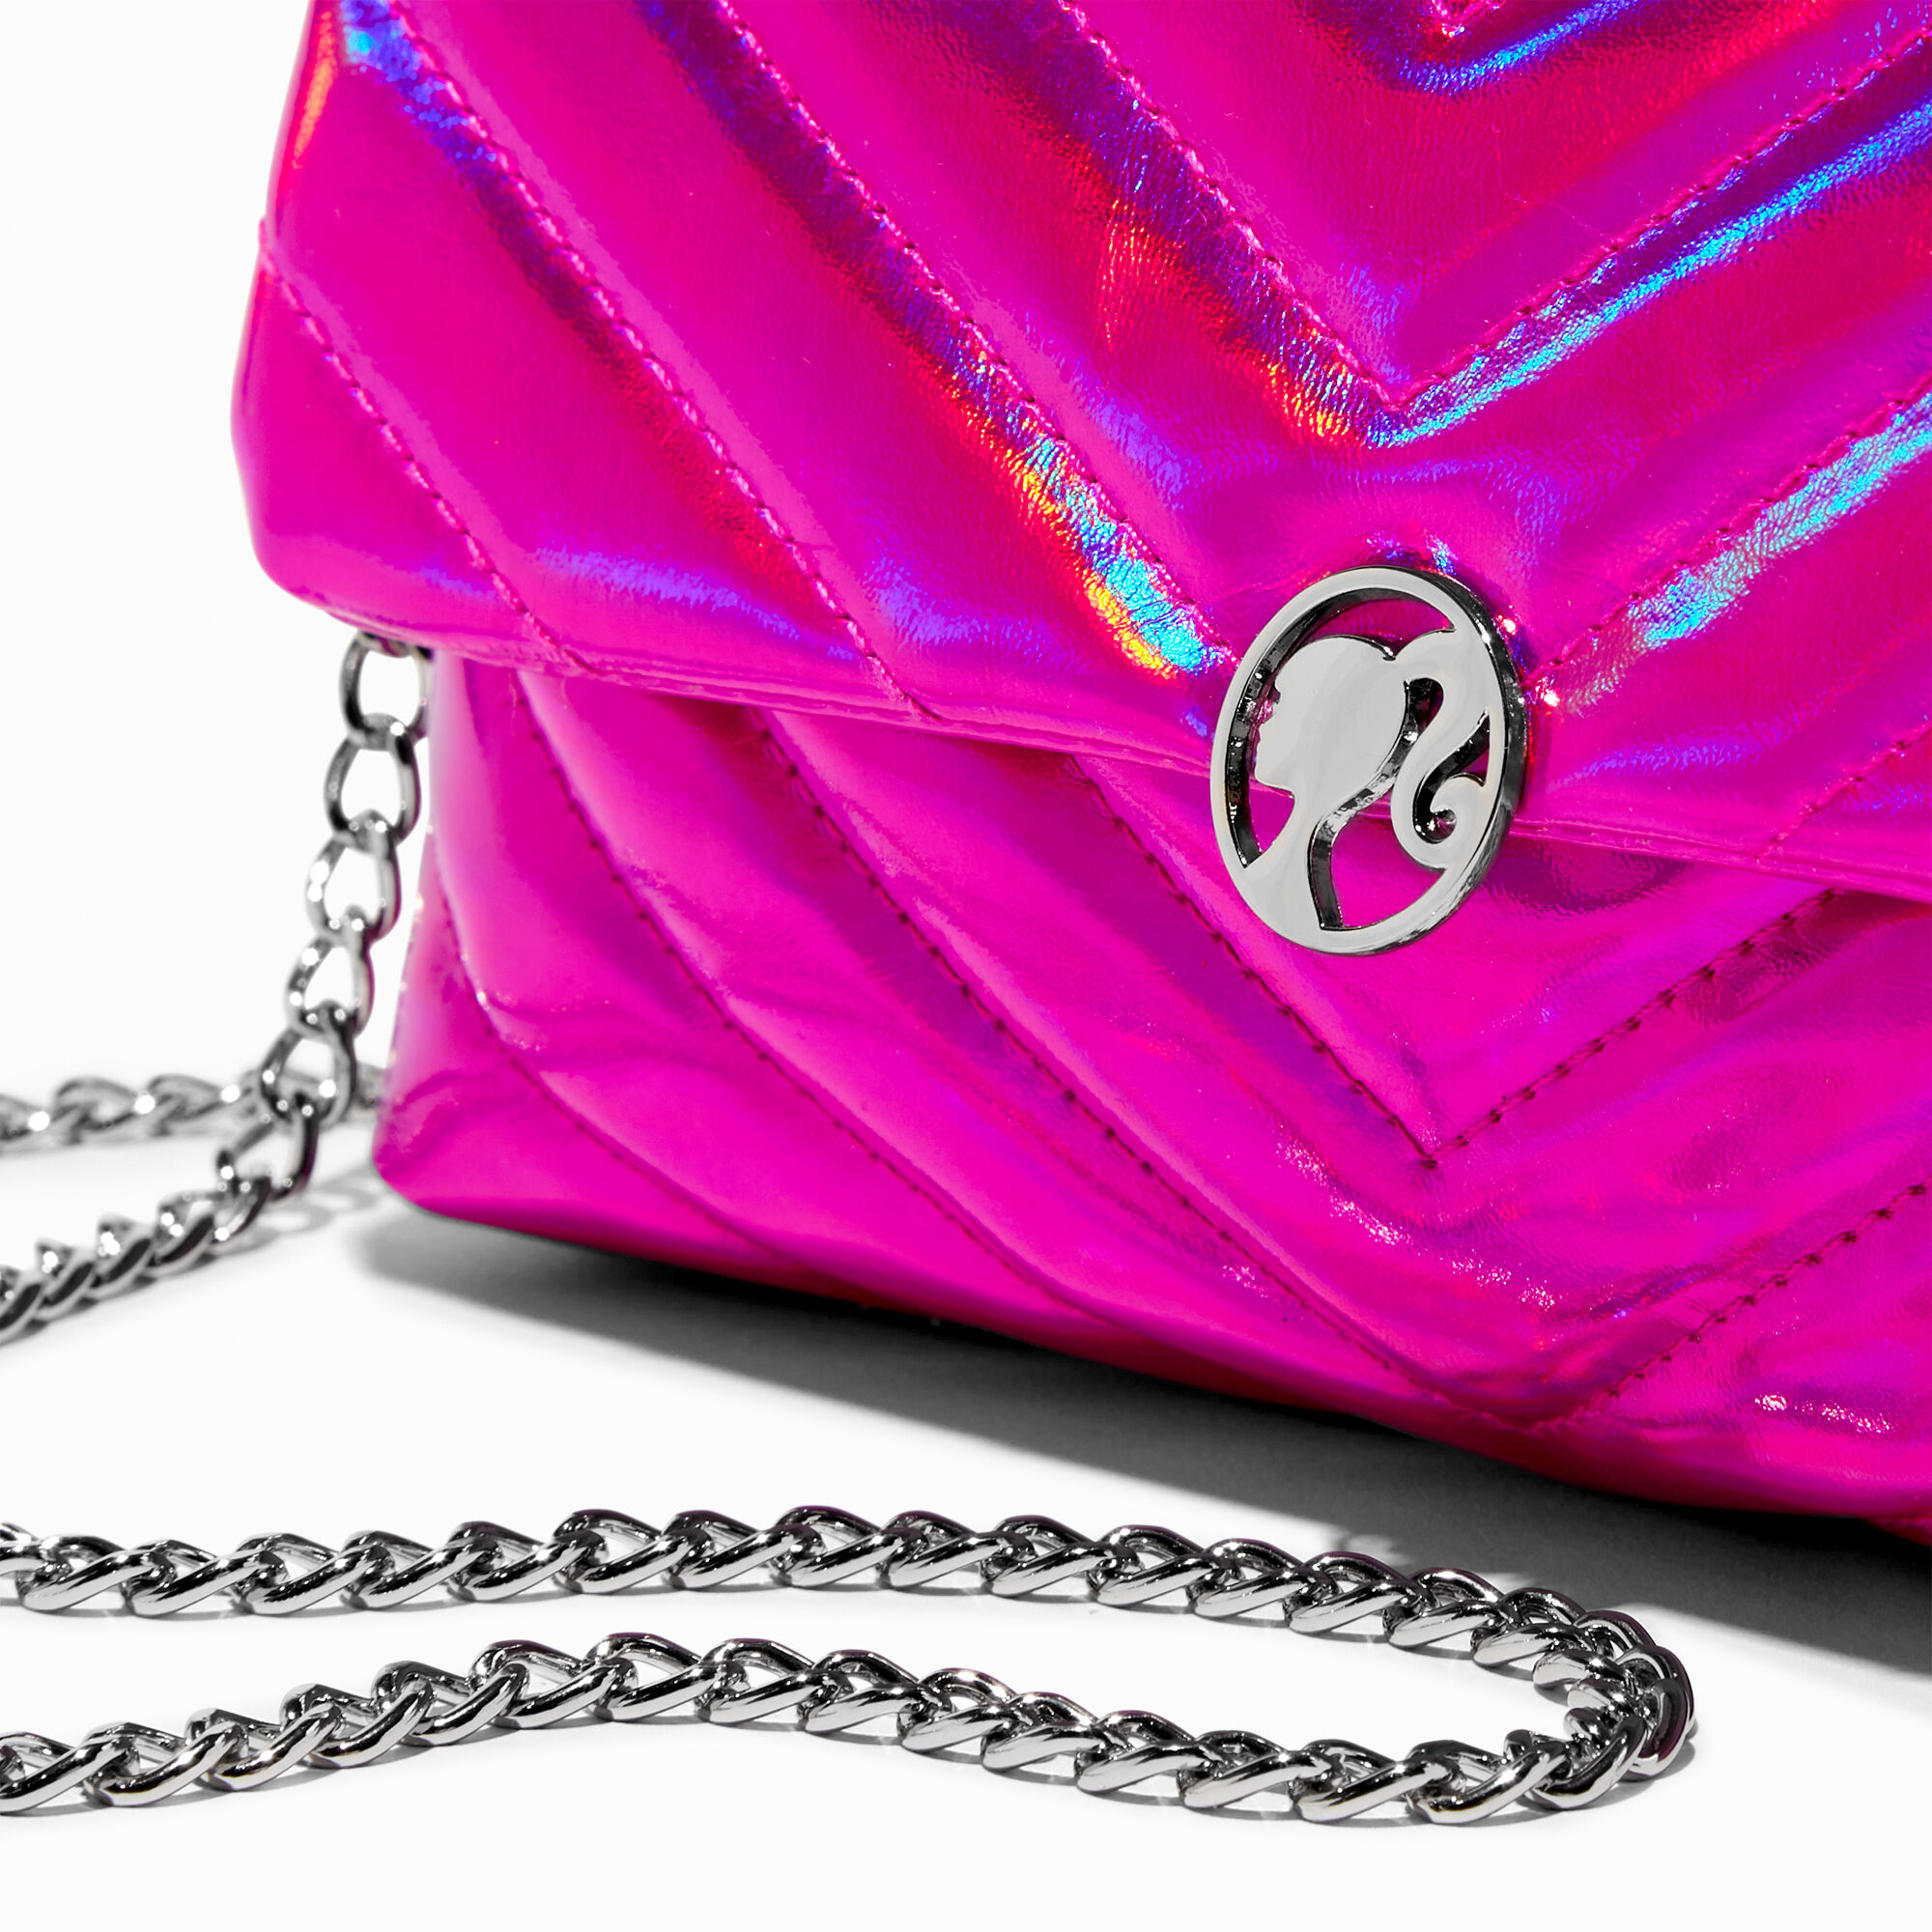 Love-Struck Bag | Shop Our Heart Shaped Purse Collection –  Embellishedofficial